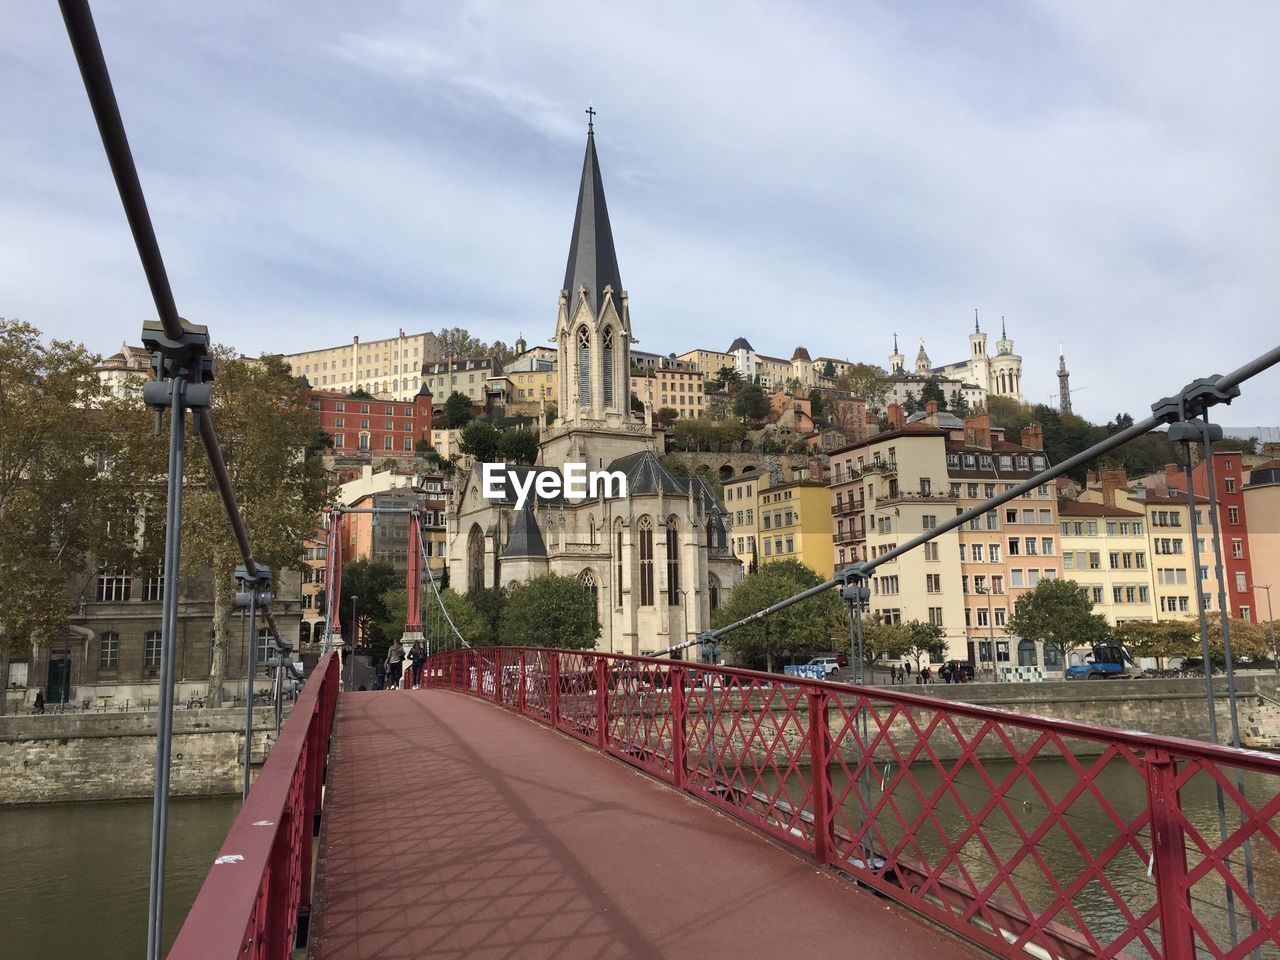 The saint-georges roman catholic church seen from the paul couturier bridge in lyon, france.